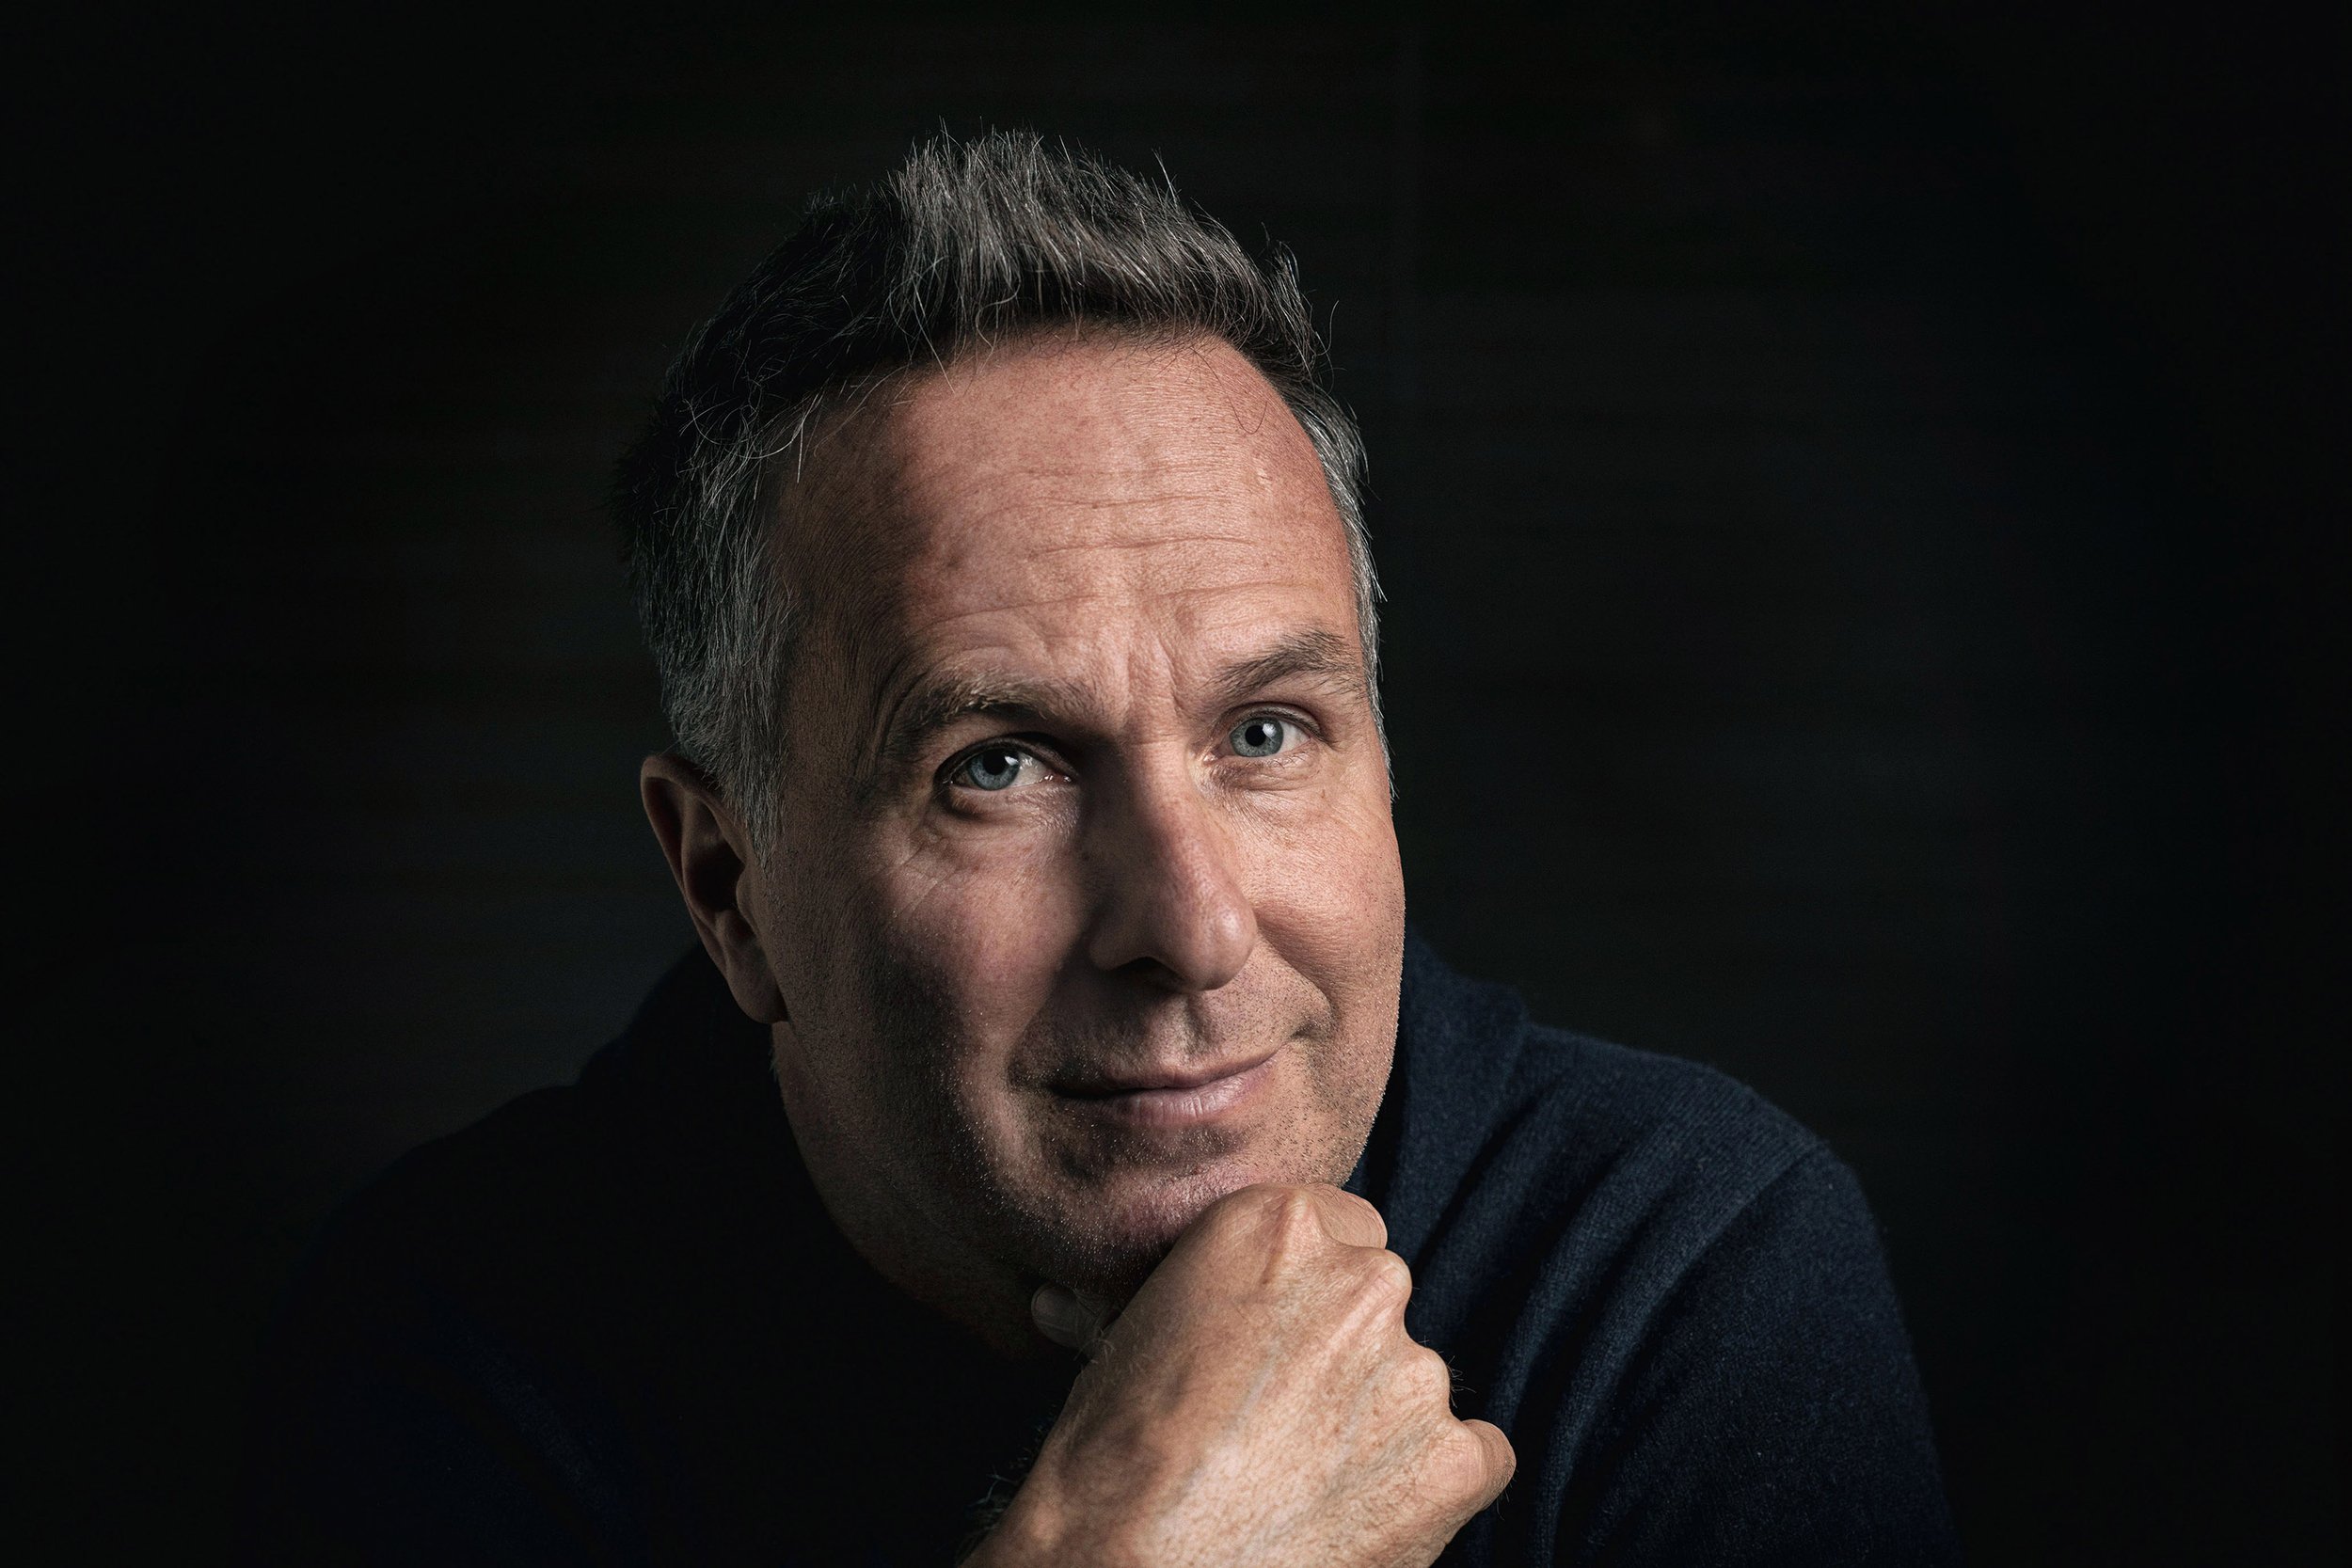  Michael vaughan - Pictured on 31/3/2023 in Wilmslow Photo Paul Cooper 